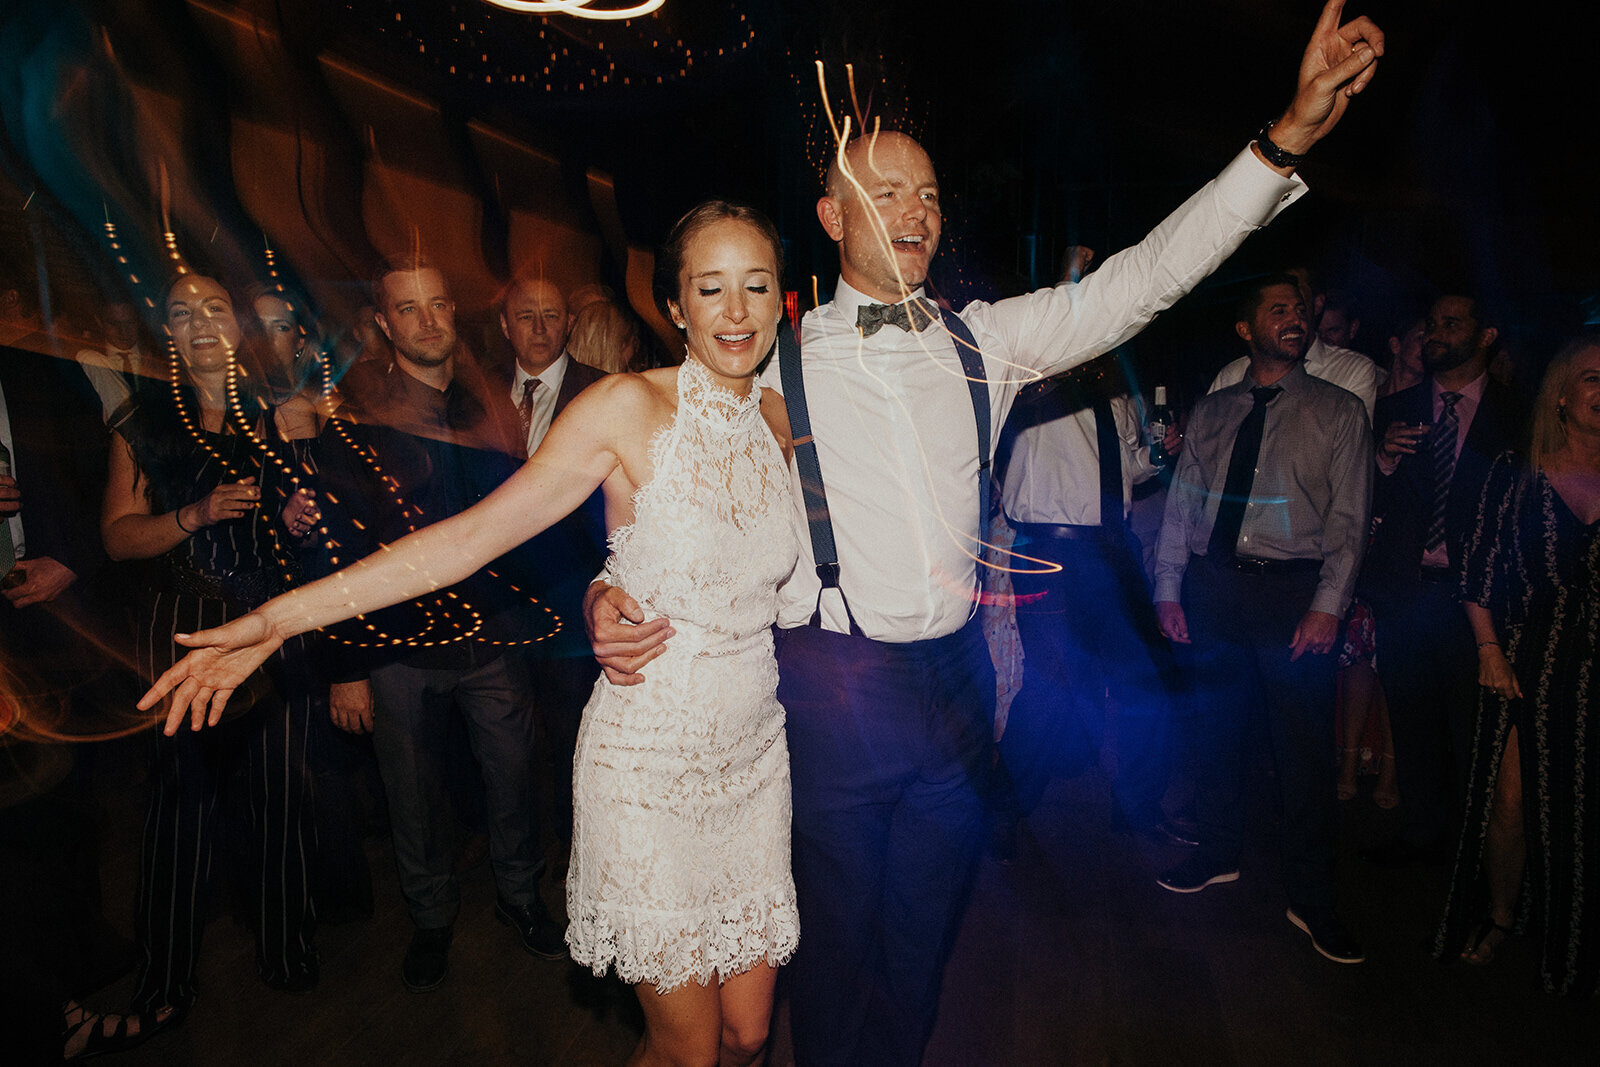 Holly Rose + Ryan - ROQUE Events - Jordan Voth Photography136